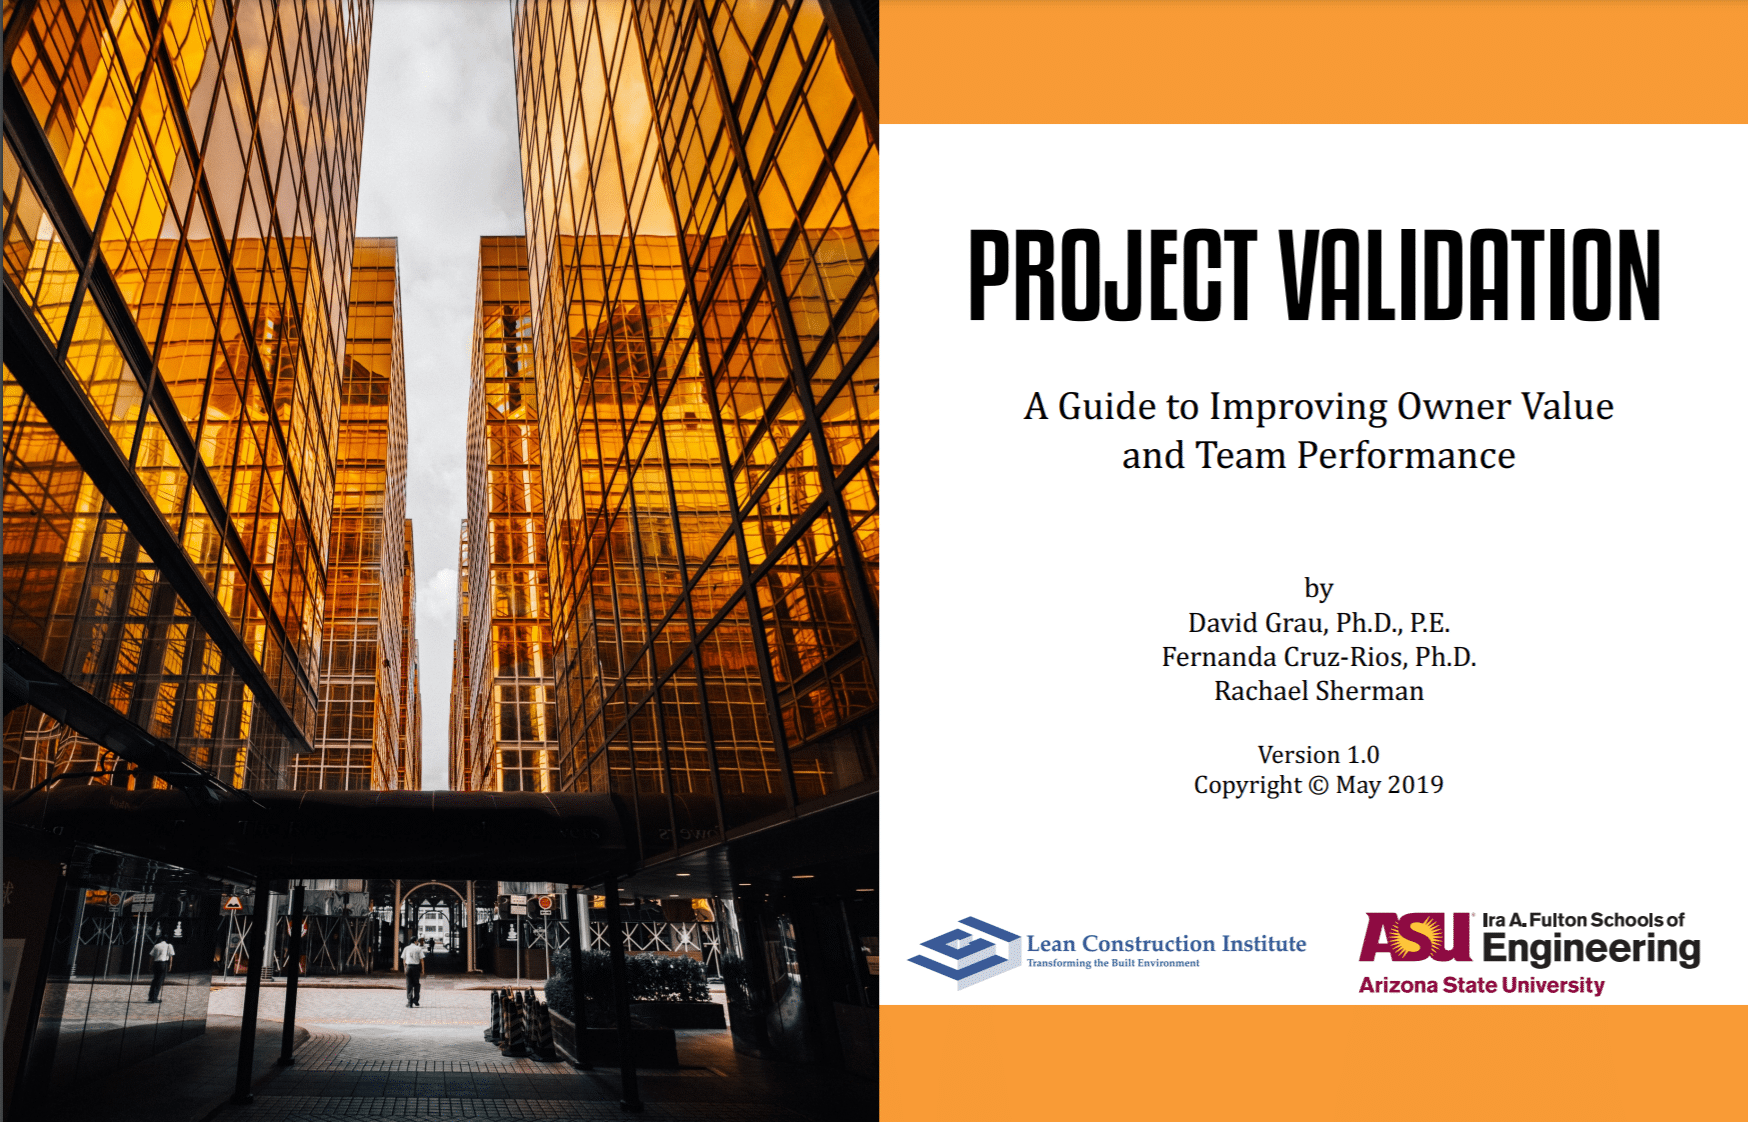 Learn the secrets of a successful validation phase for complex construction projects with this guide prepared by LCI and ASU.